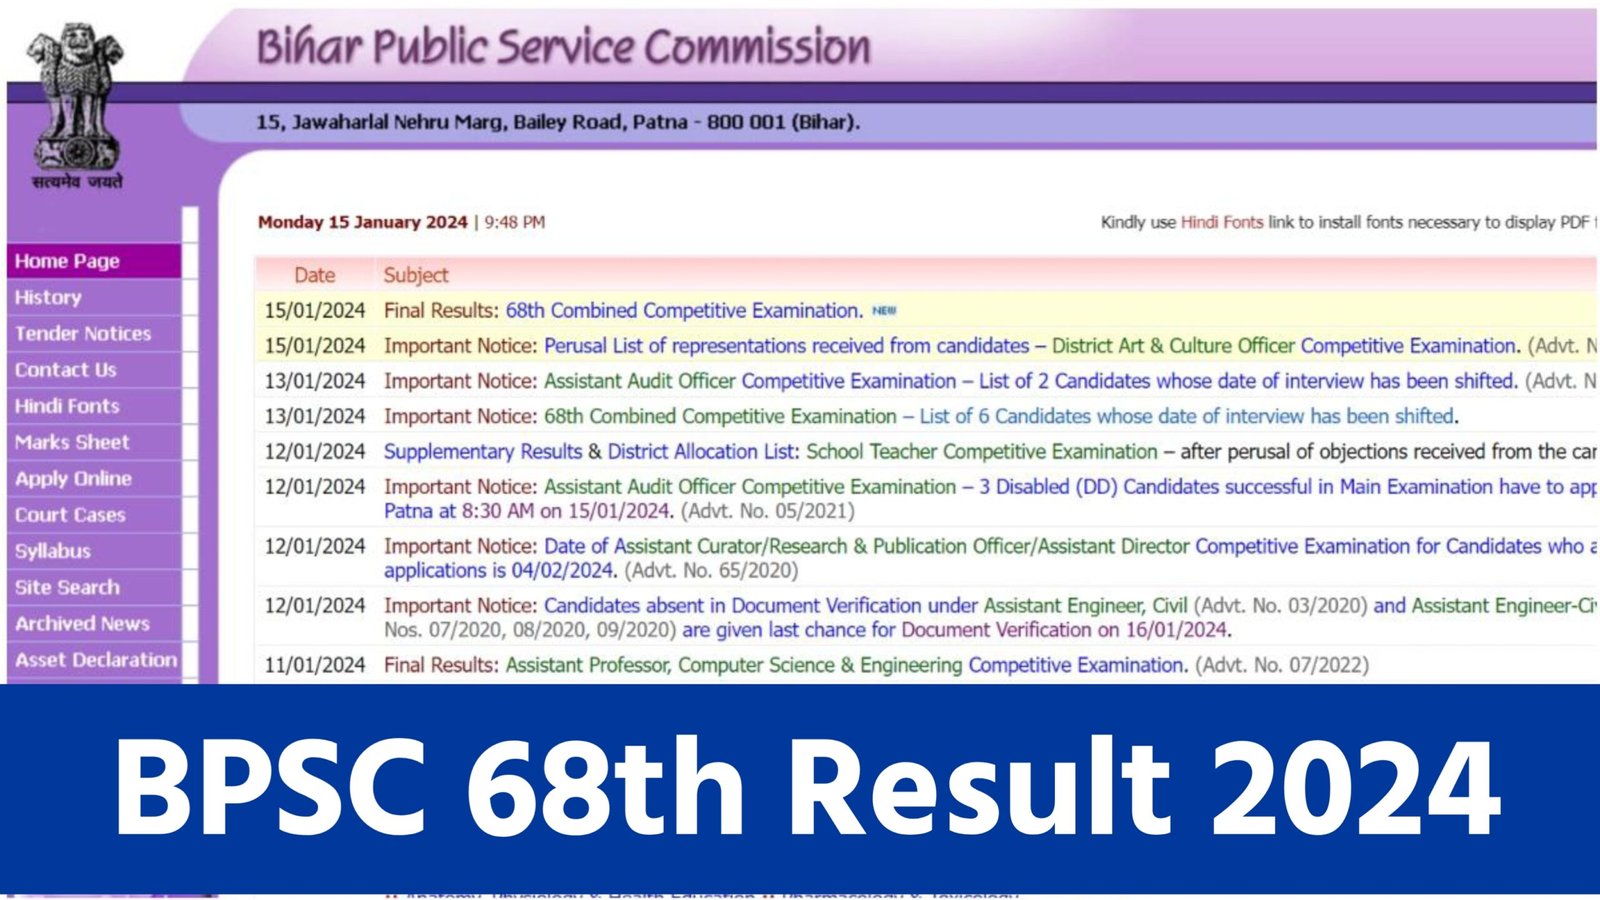 BPSC 68th Result 2024